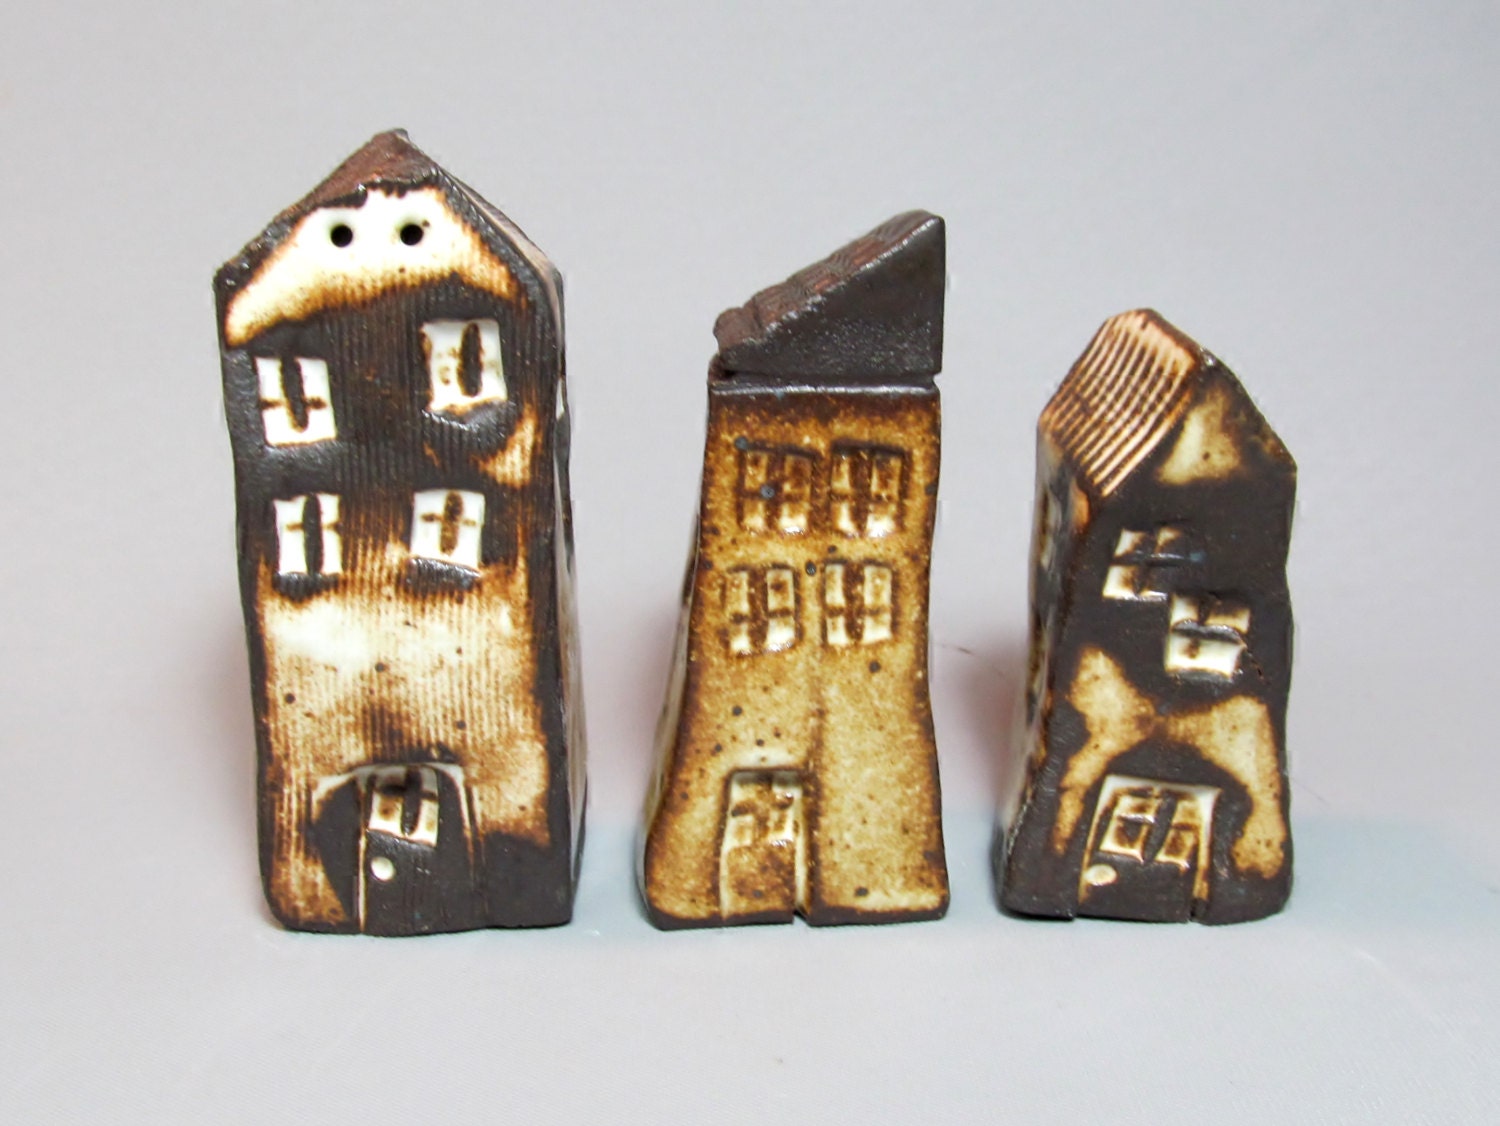 3 Small Ceramic  Houses, One of a kind, Collectible, Rustic Houses, Home Decor, Gift - BadDogCeramics